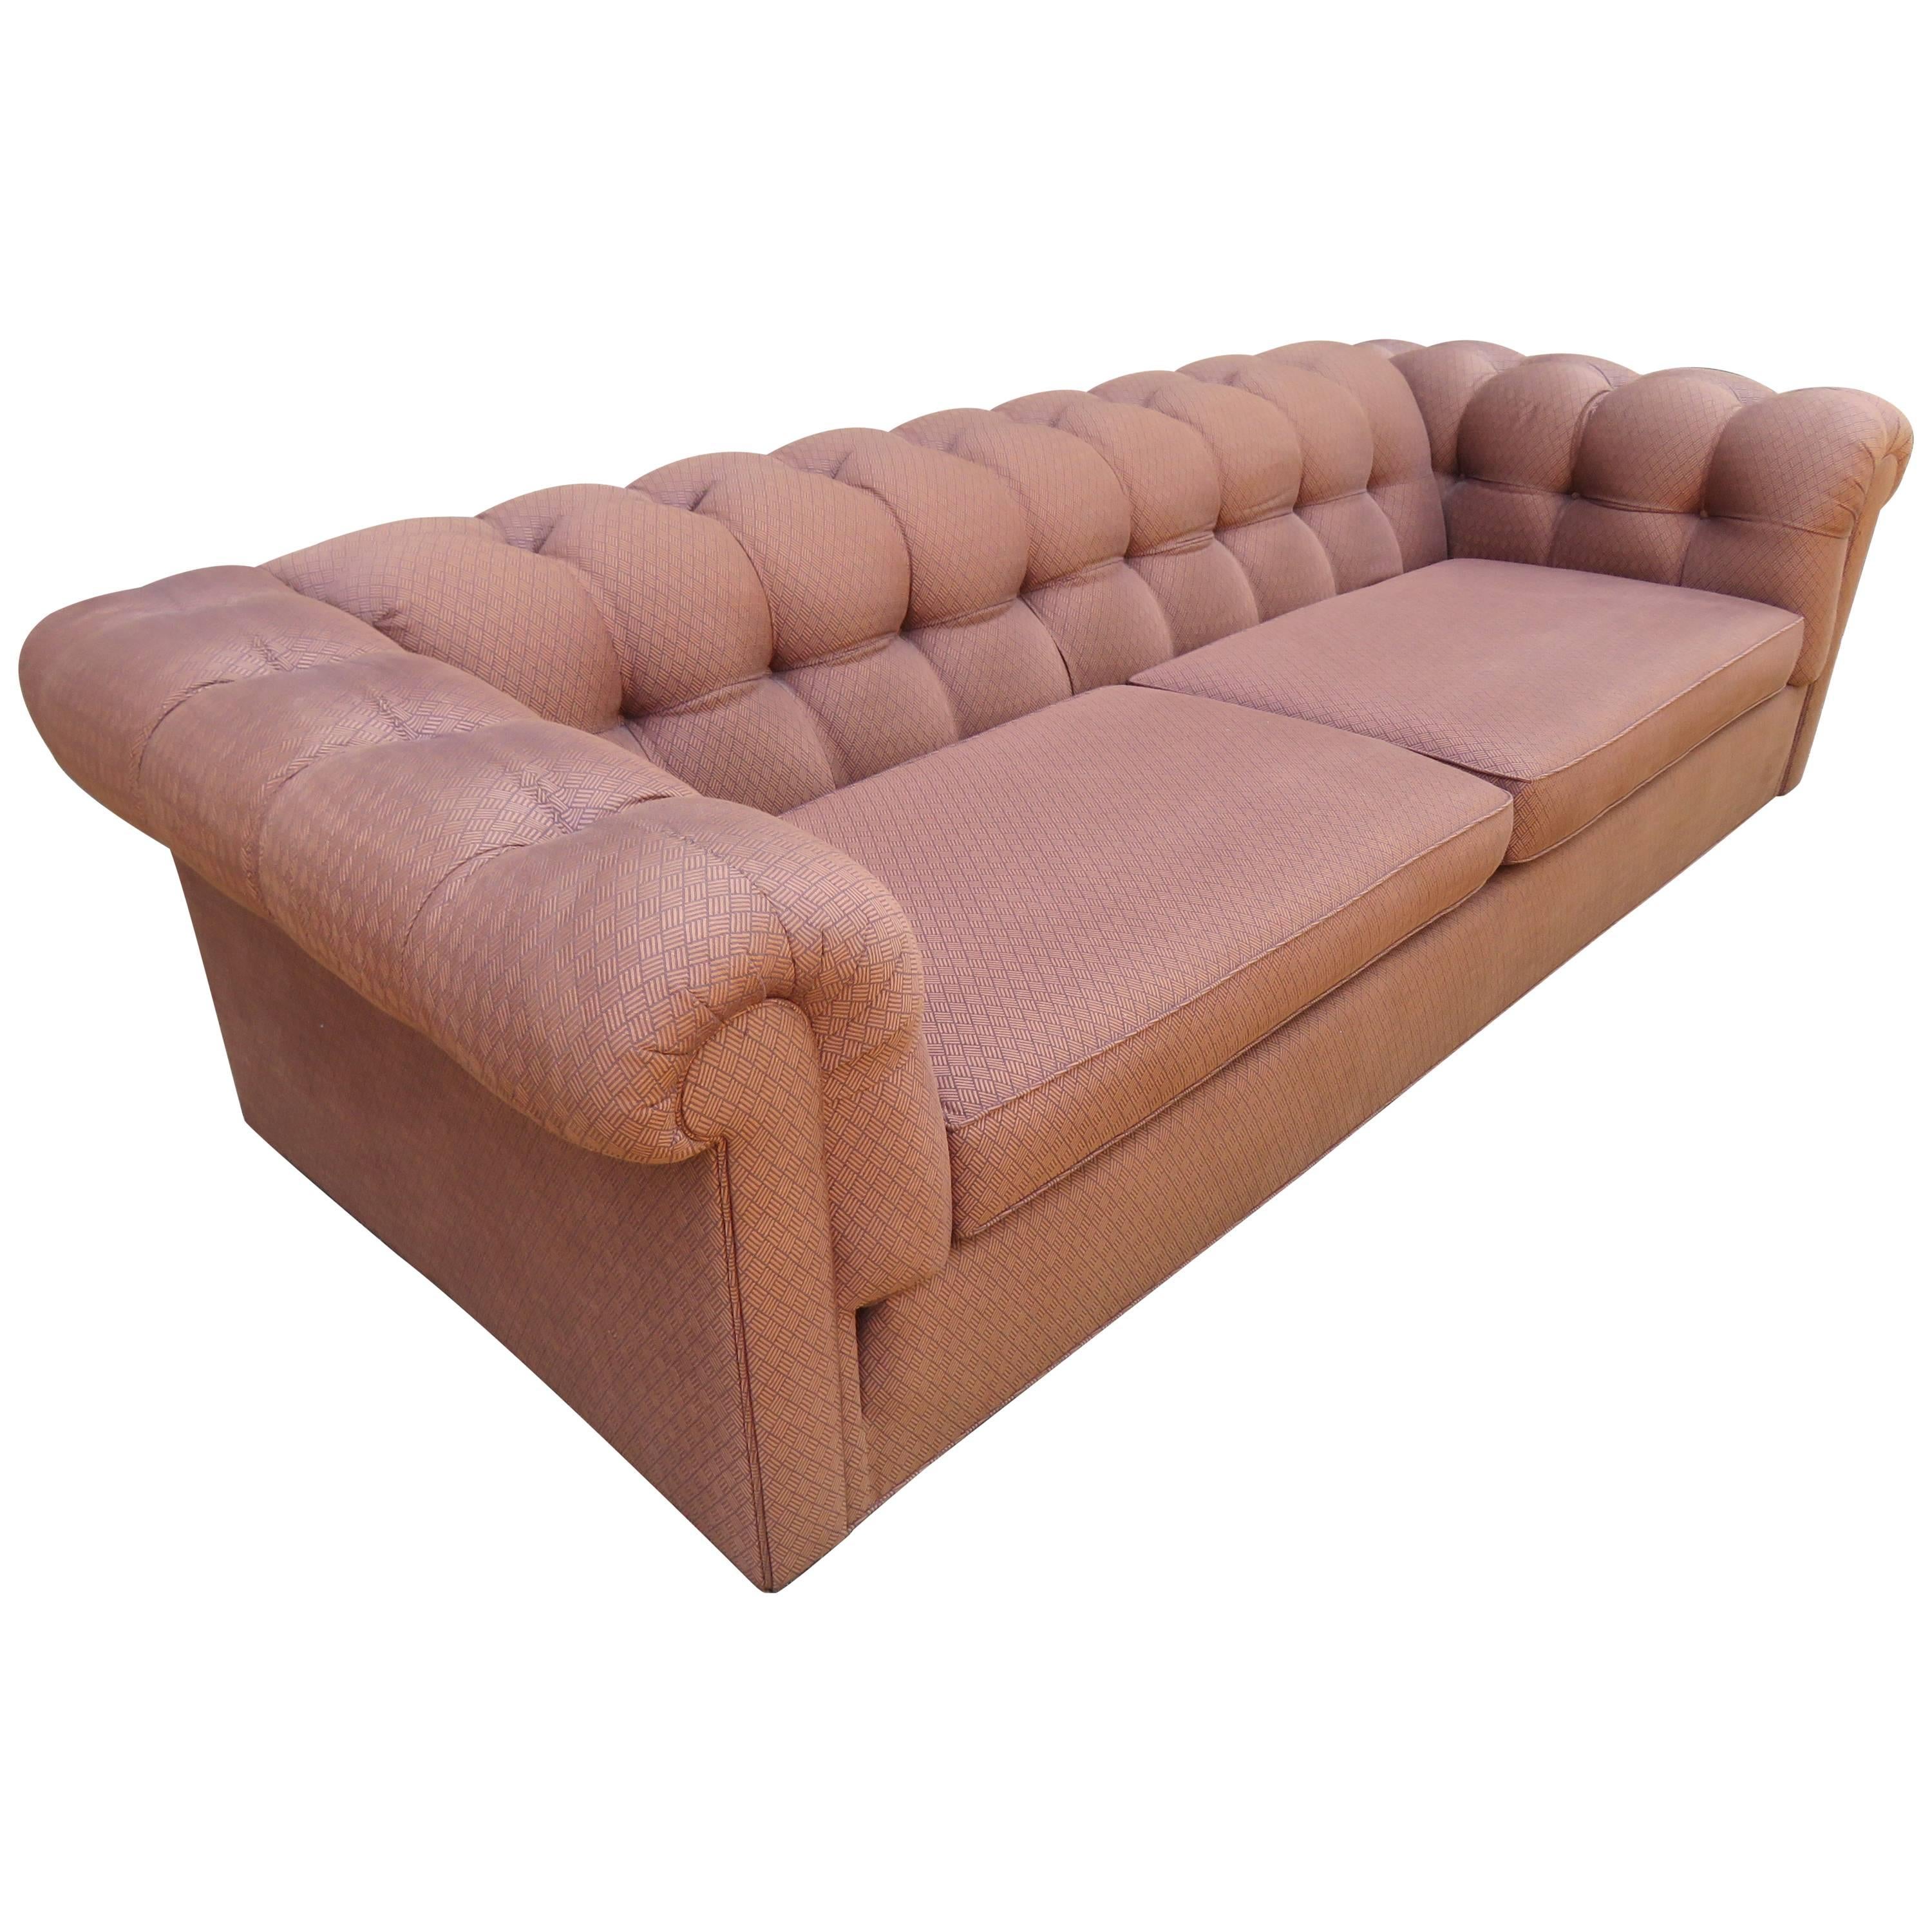 Handsome Mid-Century Modern Dunbar Style Chesterfield Tufted Party Sofa For Sale